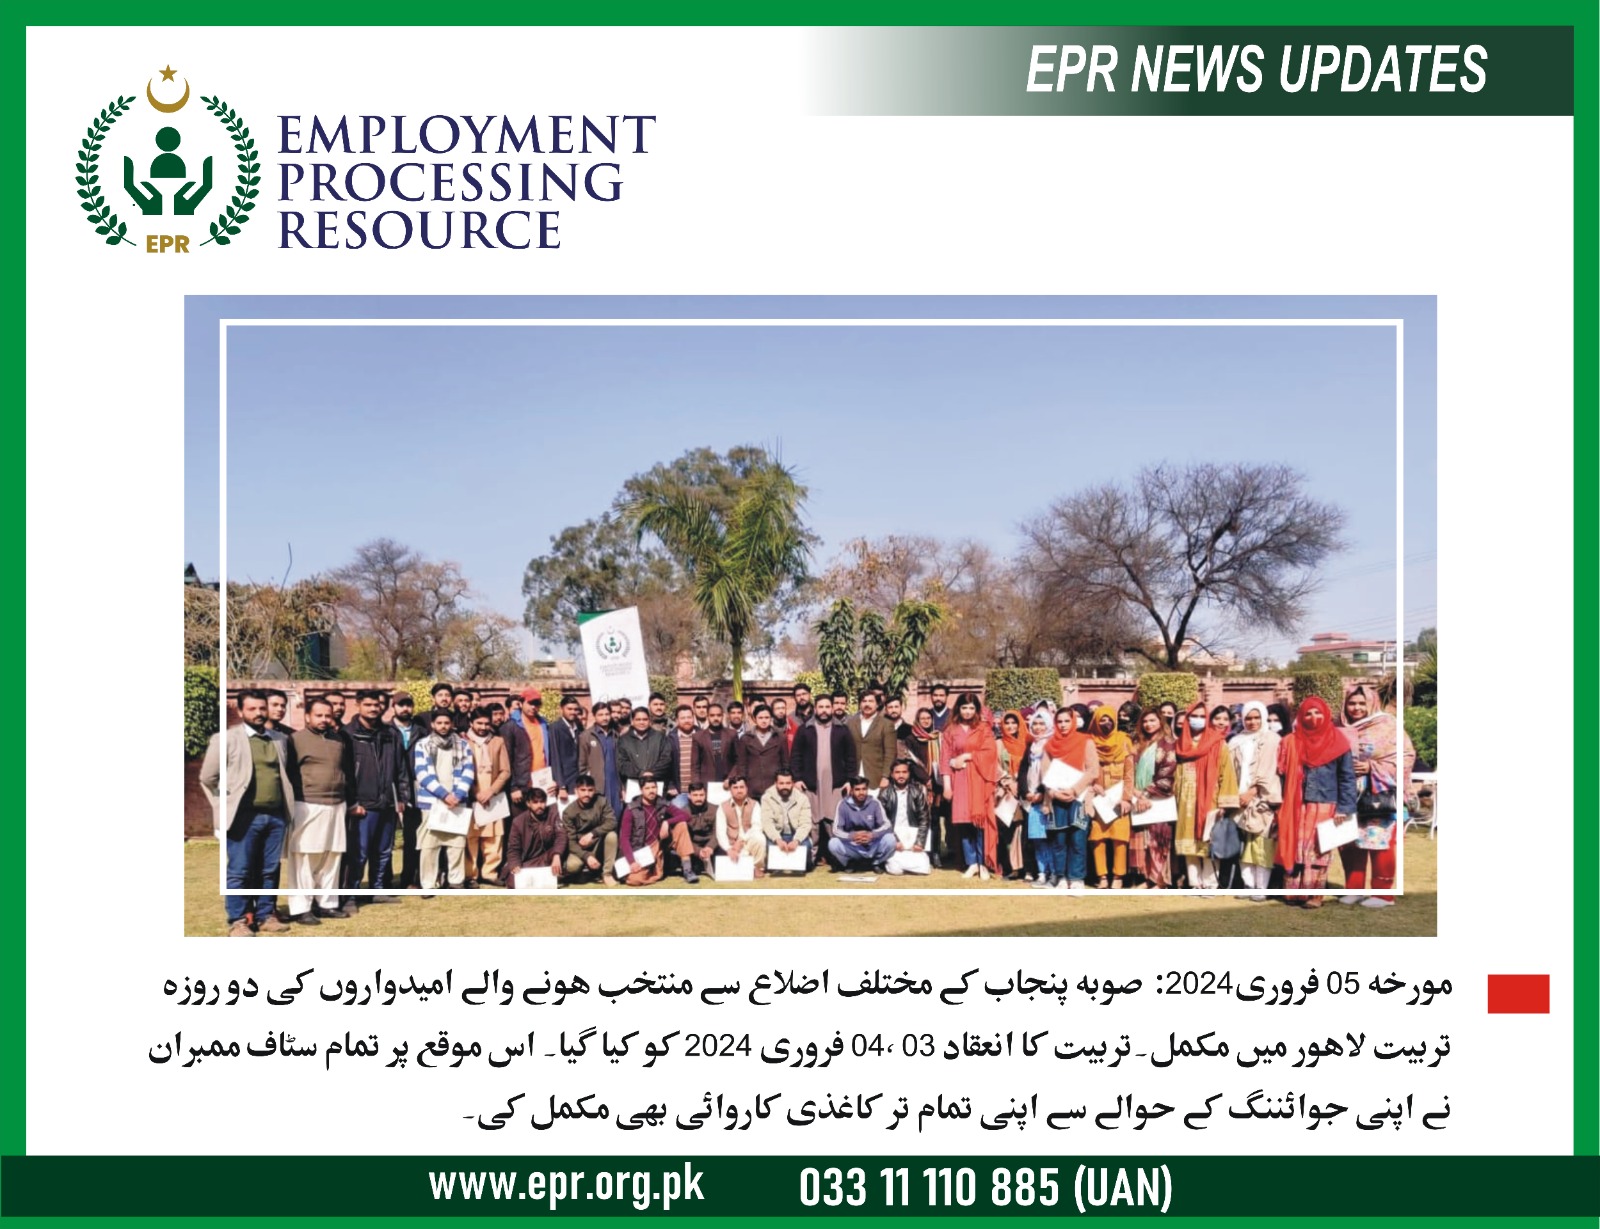 EPR News Gallery | NEWLY HIRED PUNJAB REMOTE STAFF TRAINING HELD SUCCESSFULLY